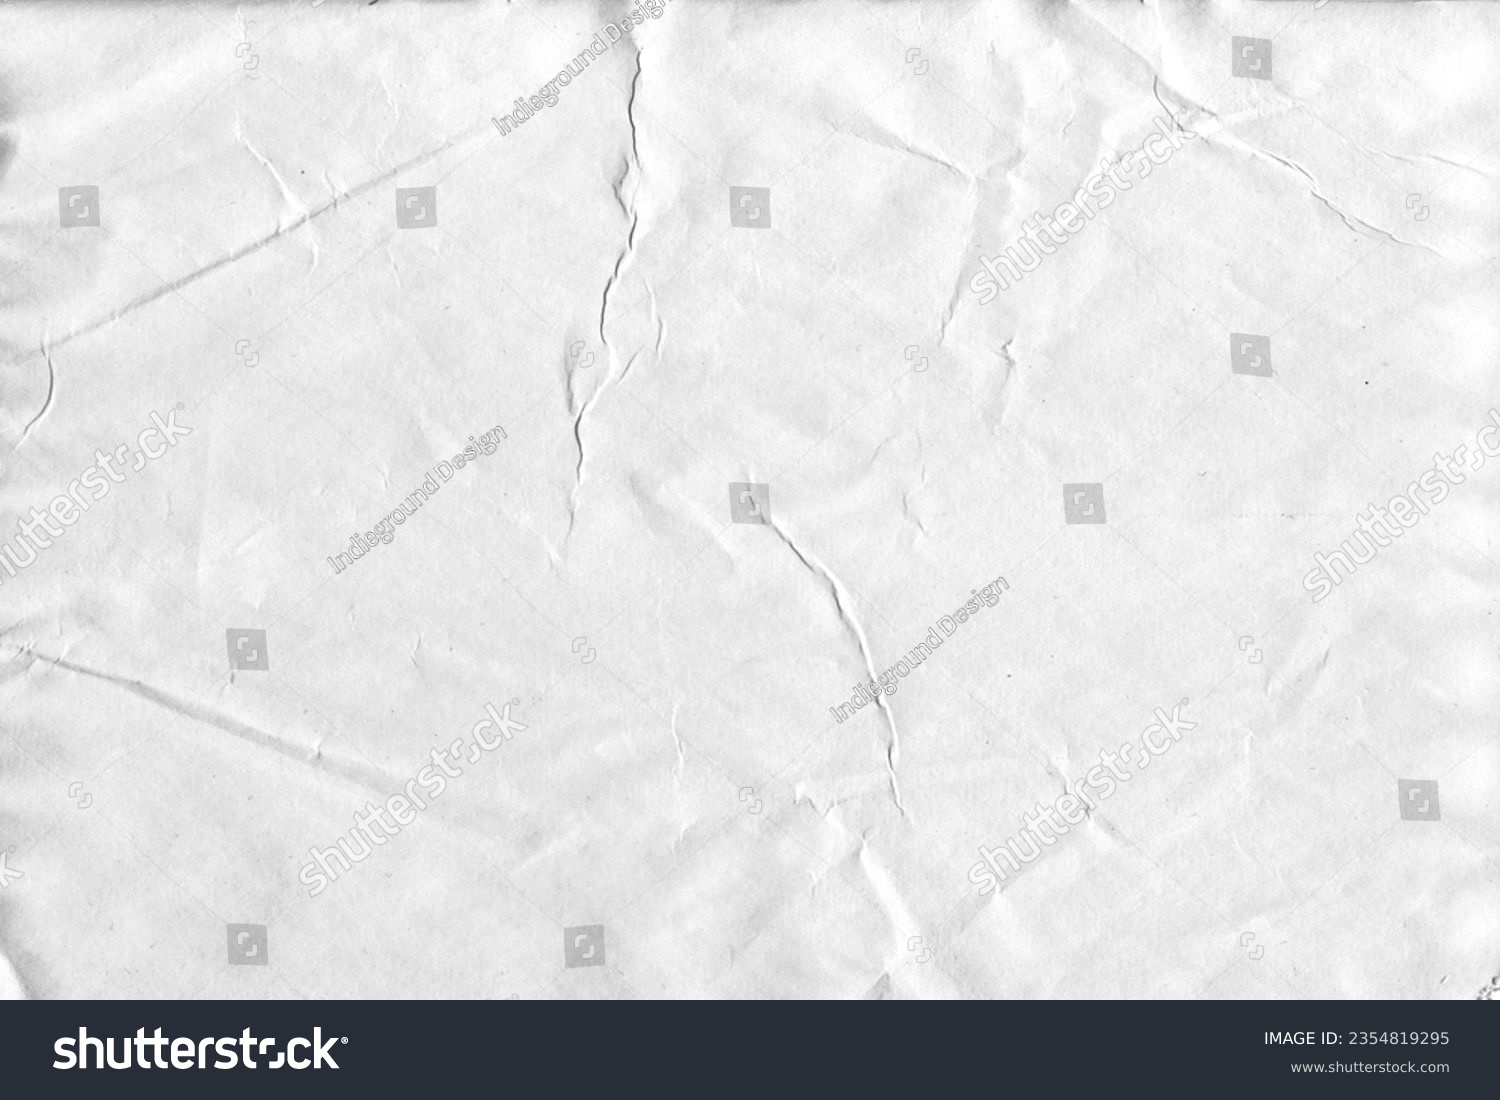 High-quality JPEG featuring a distinctive crumpled paper texture. Its unique character adds depth and charm to designs. Ideal for digital art, backgrounds, overlays, or crafting aesthetics #2354819295